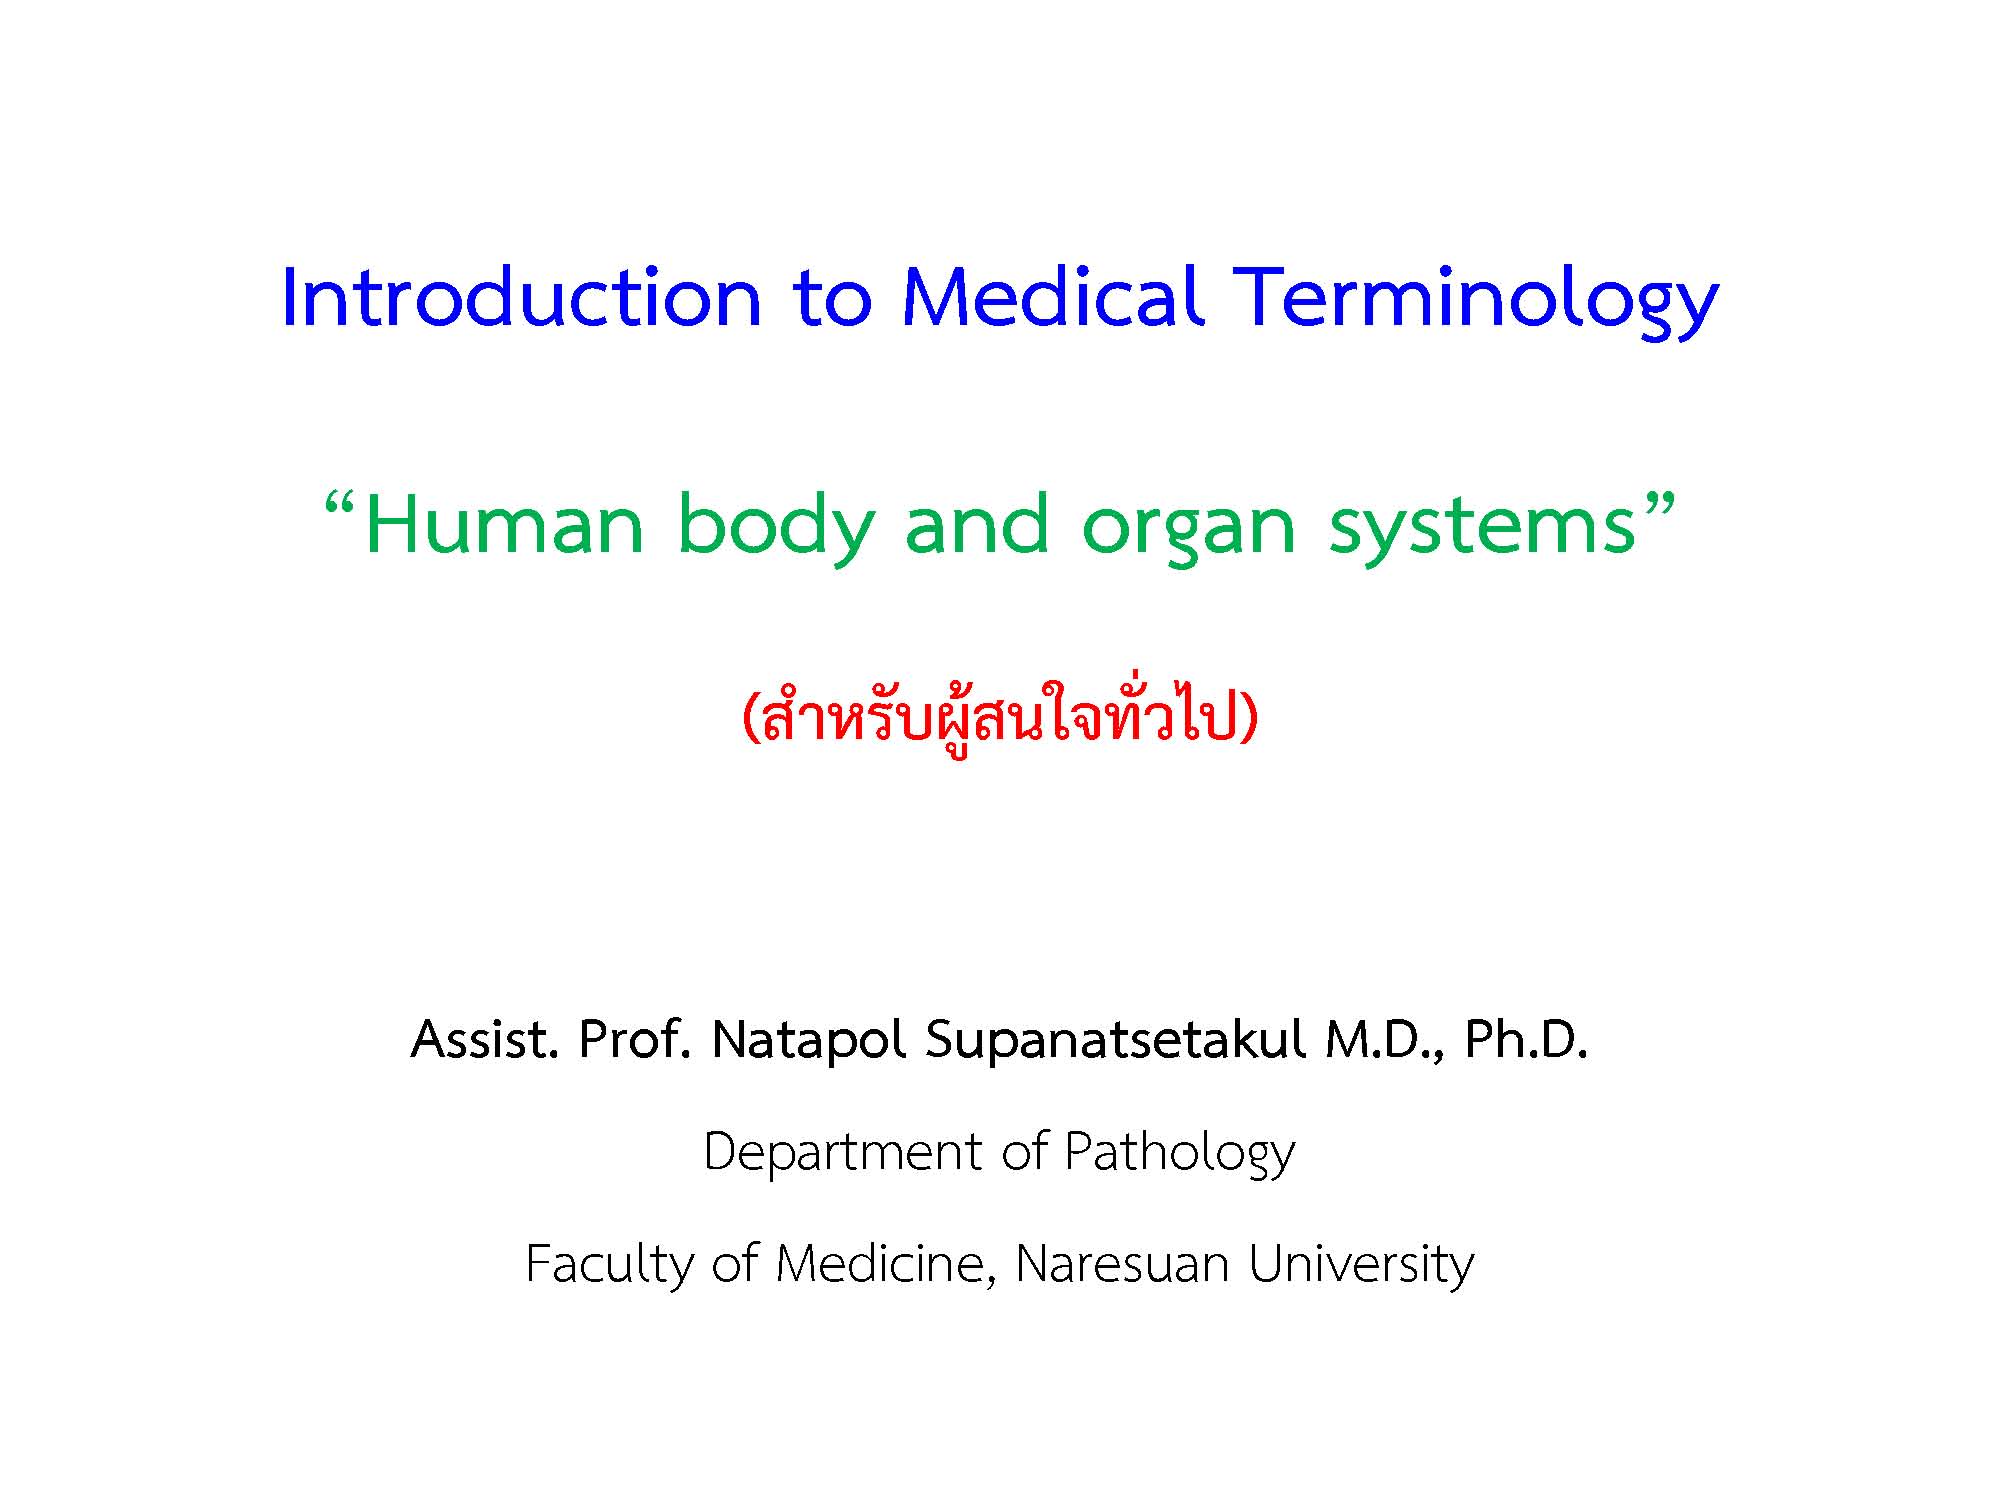 INTRODUCTION TO MEDICAL TERMINOLOGY  